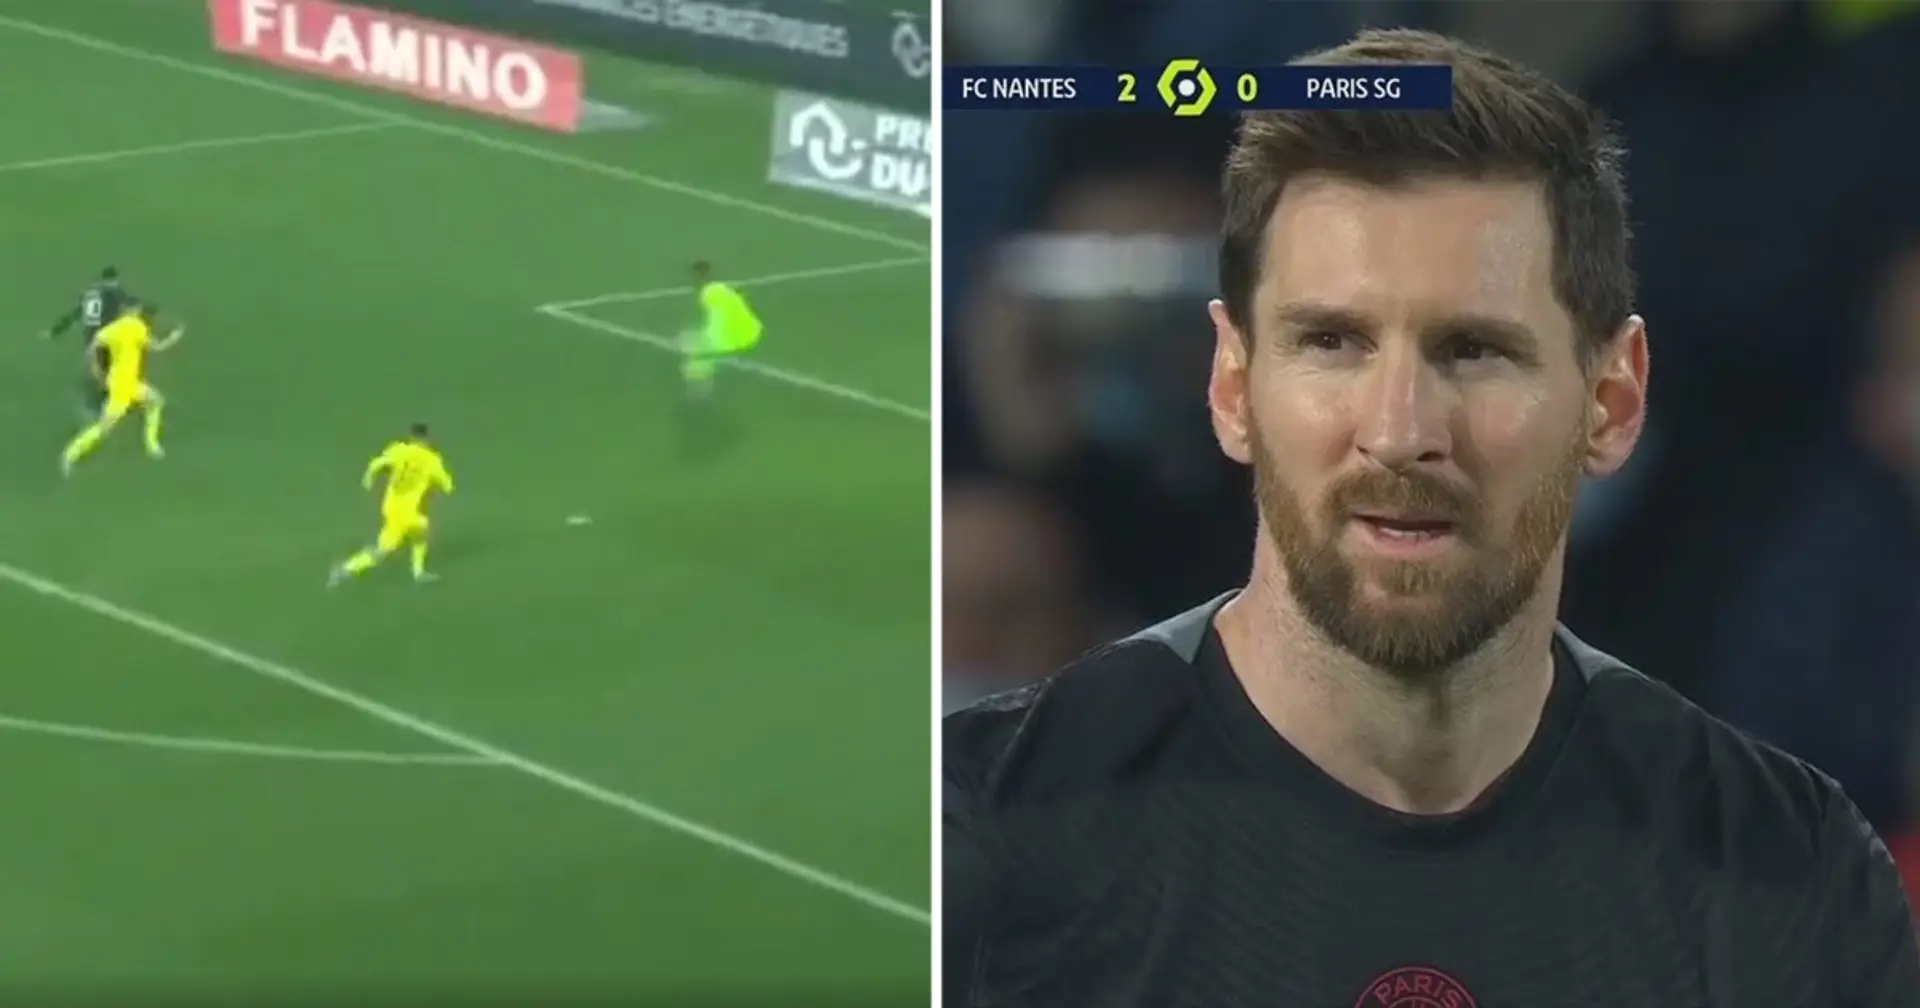 Messi continues with just 2 leagues goals at PSG after huge miss in latest match